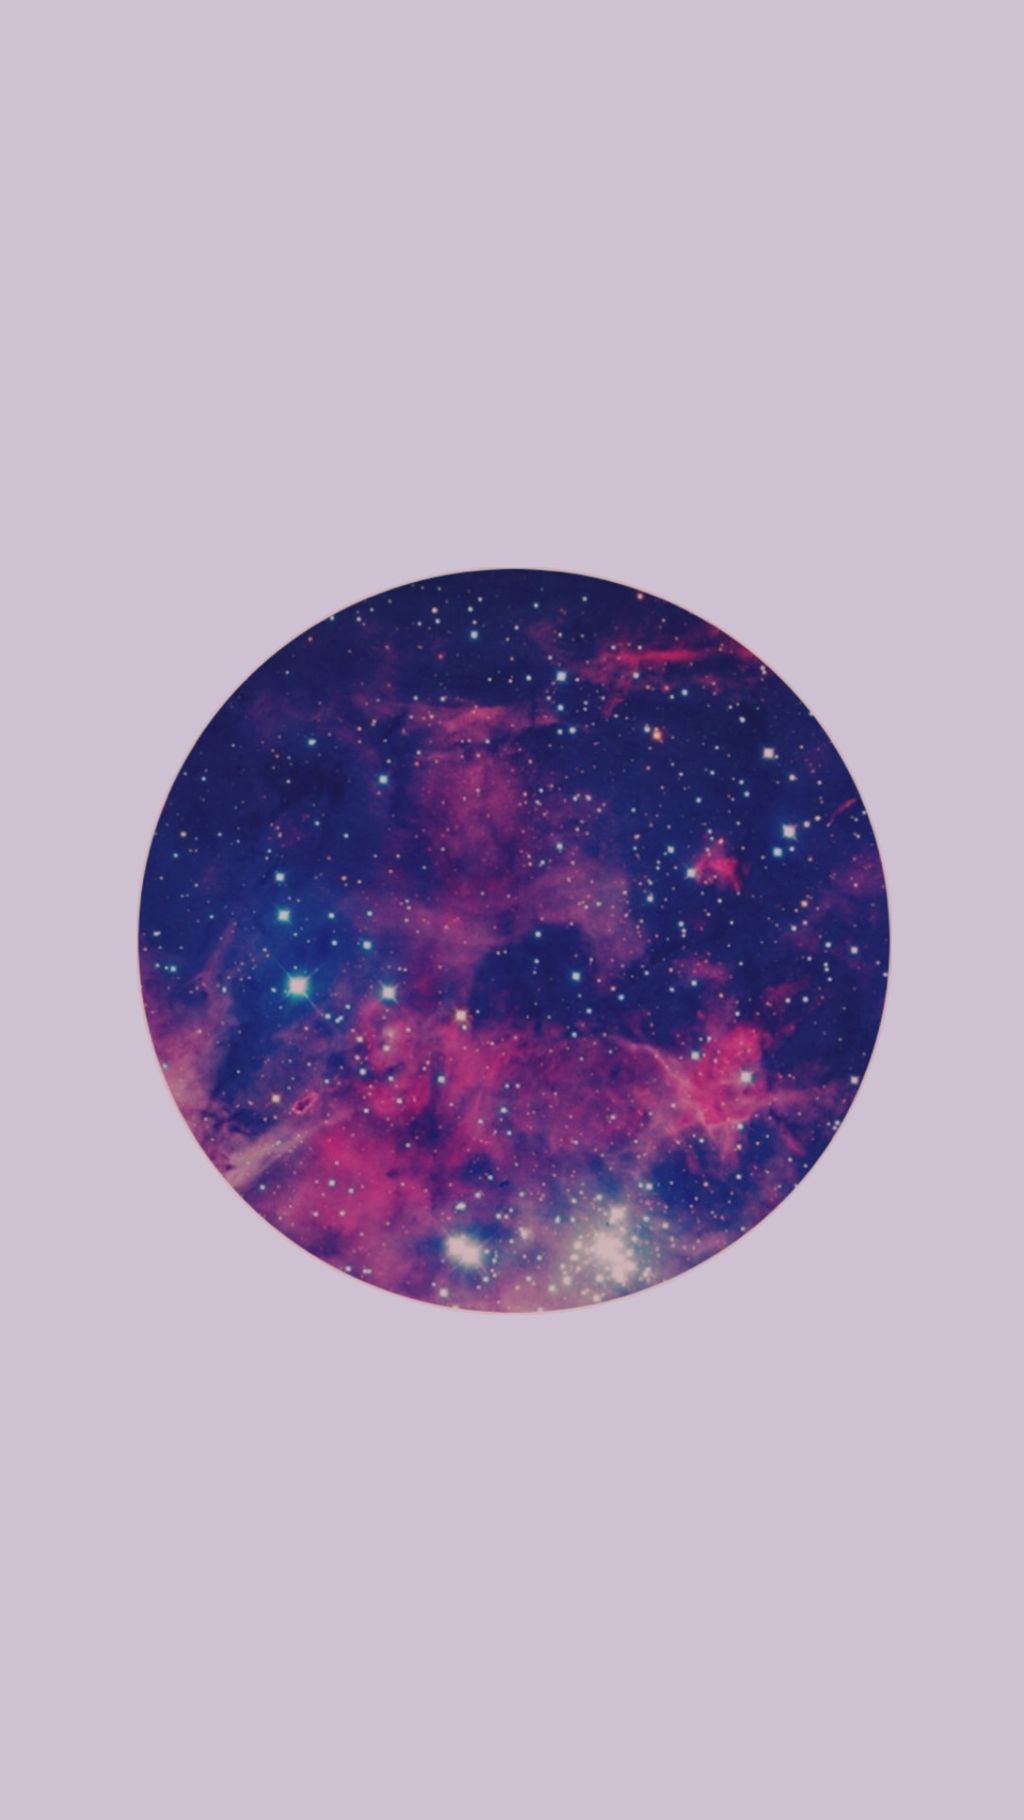 Free download wallpaper galaxy aesthetic freetouse galaxywallpaper [1024x1820] for your Desktop, Mobile & Tablet. Explore Wallpaper Galaxy Aesthetic. Wallpaper Galaxy Aesthetic, Aesthetic Wallpaper, Aesthetic Wallpaper